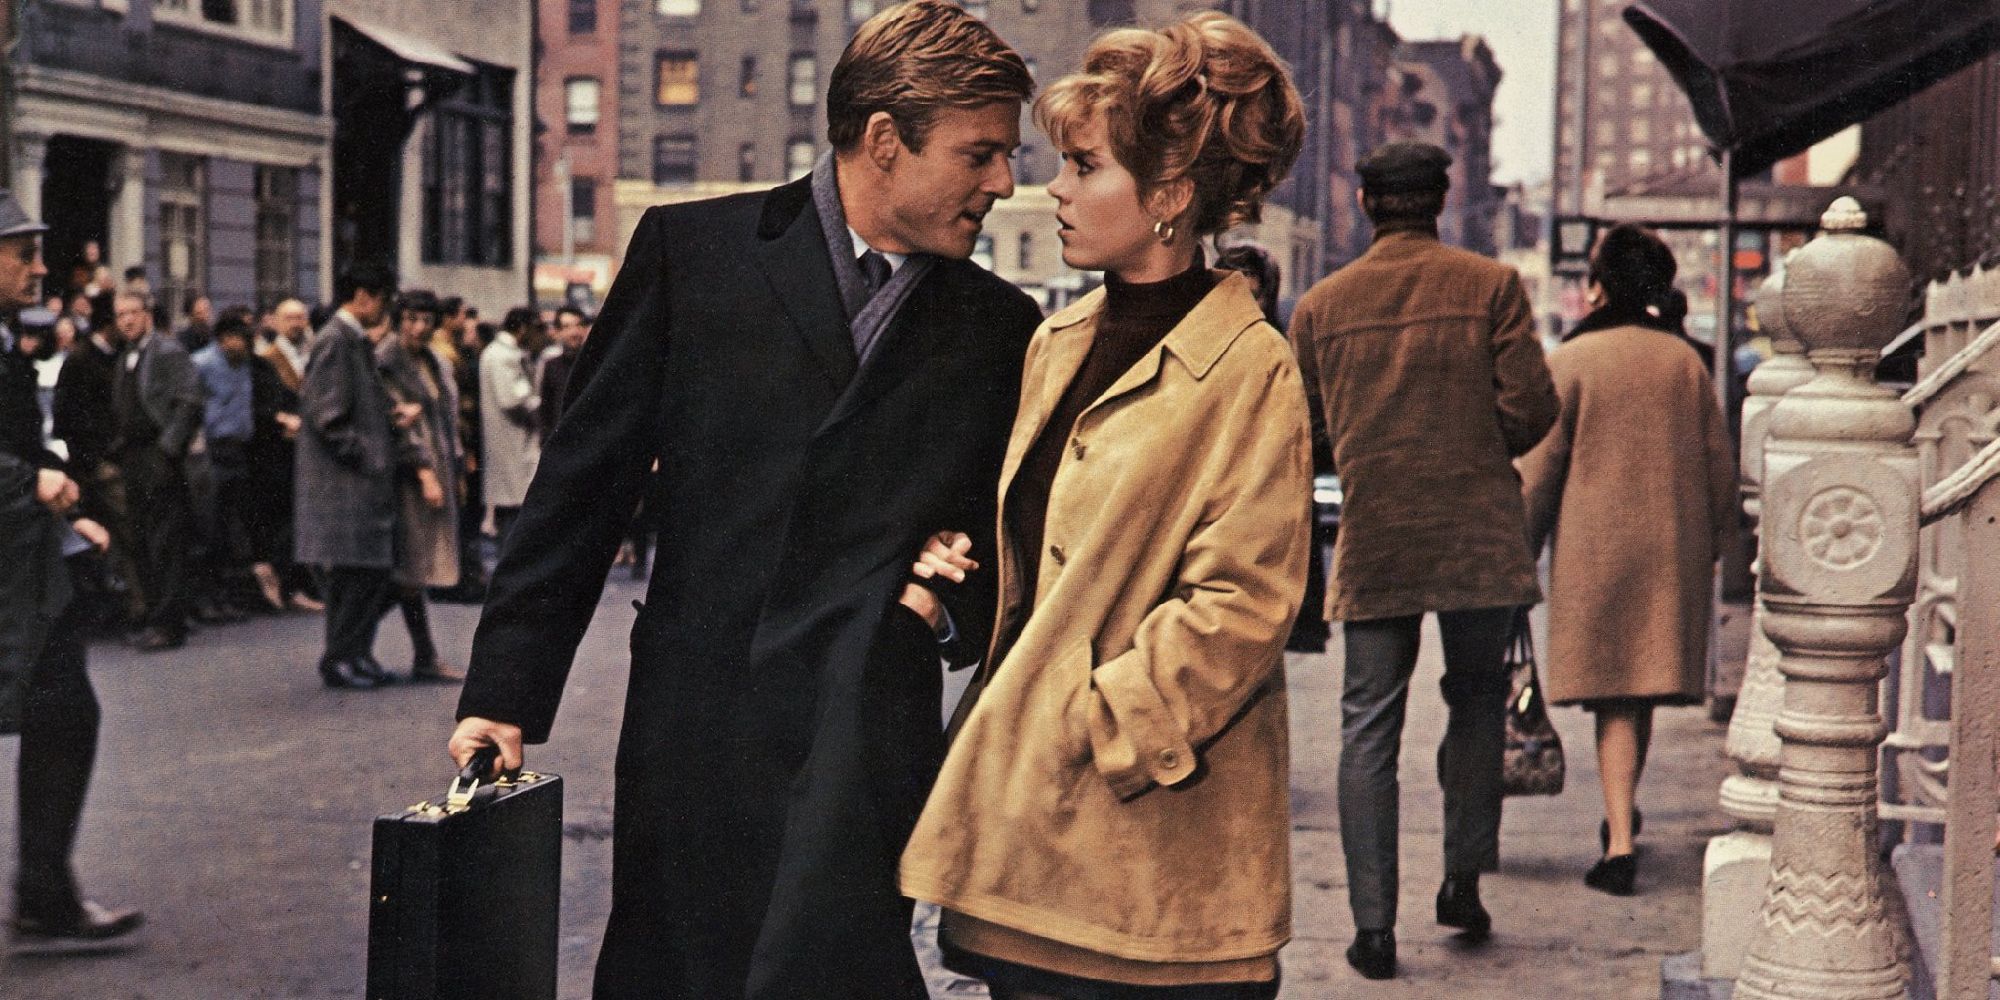 Barefoot in the Park - 1967